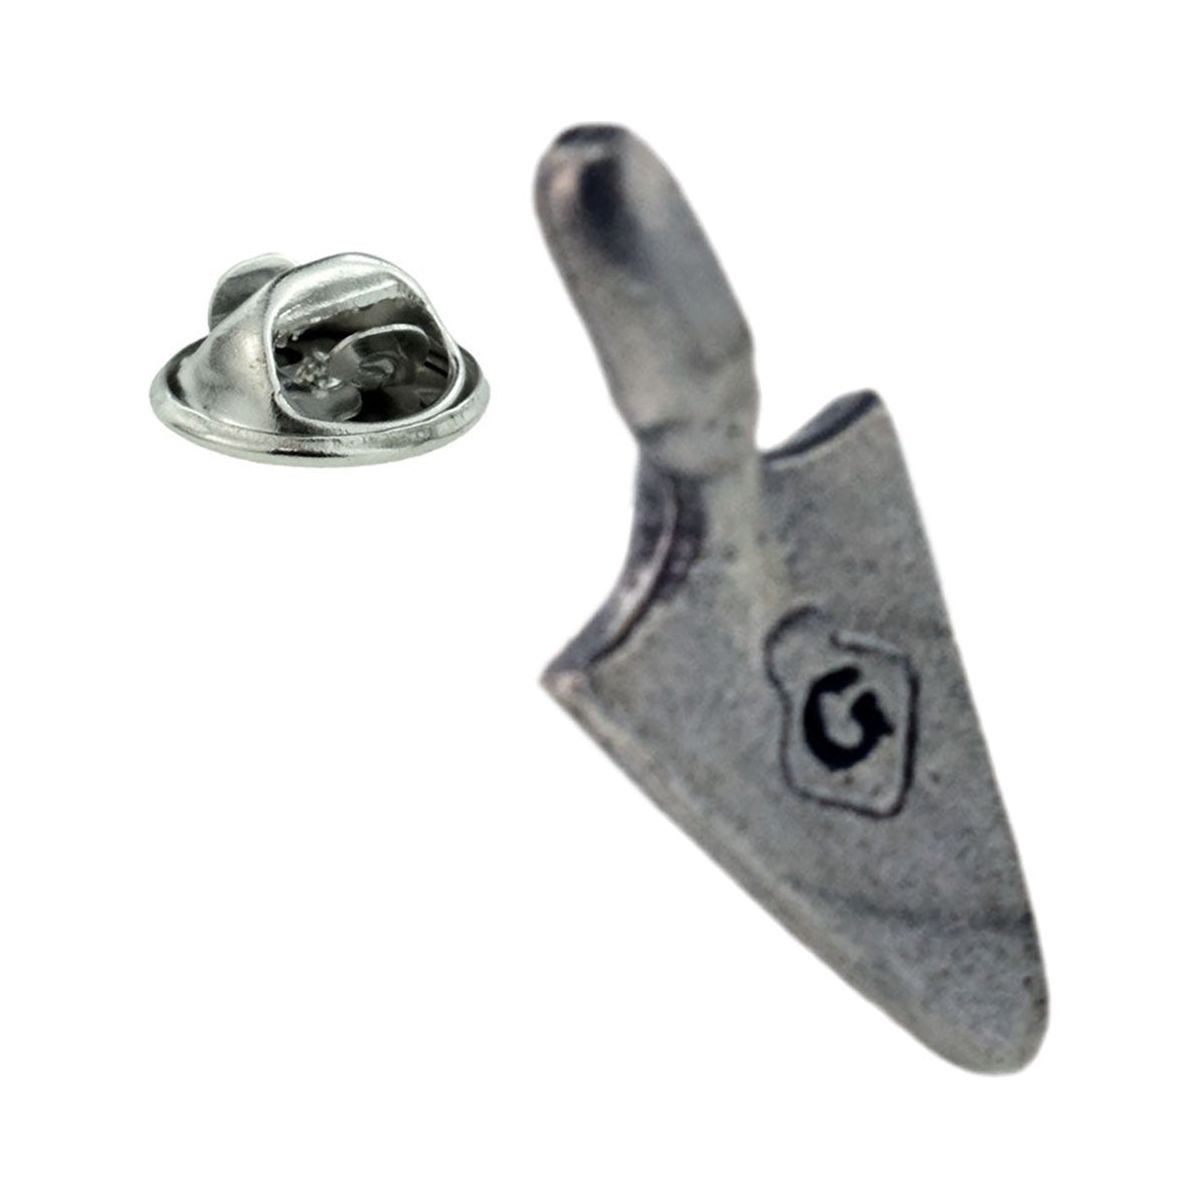 Masonic with G Design Trowel Pewter Lapel Pin Badge - Ashton and Finch